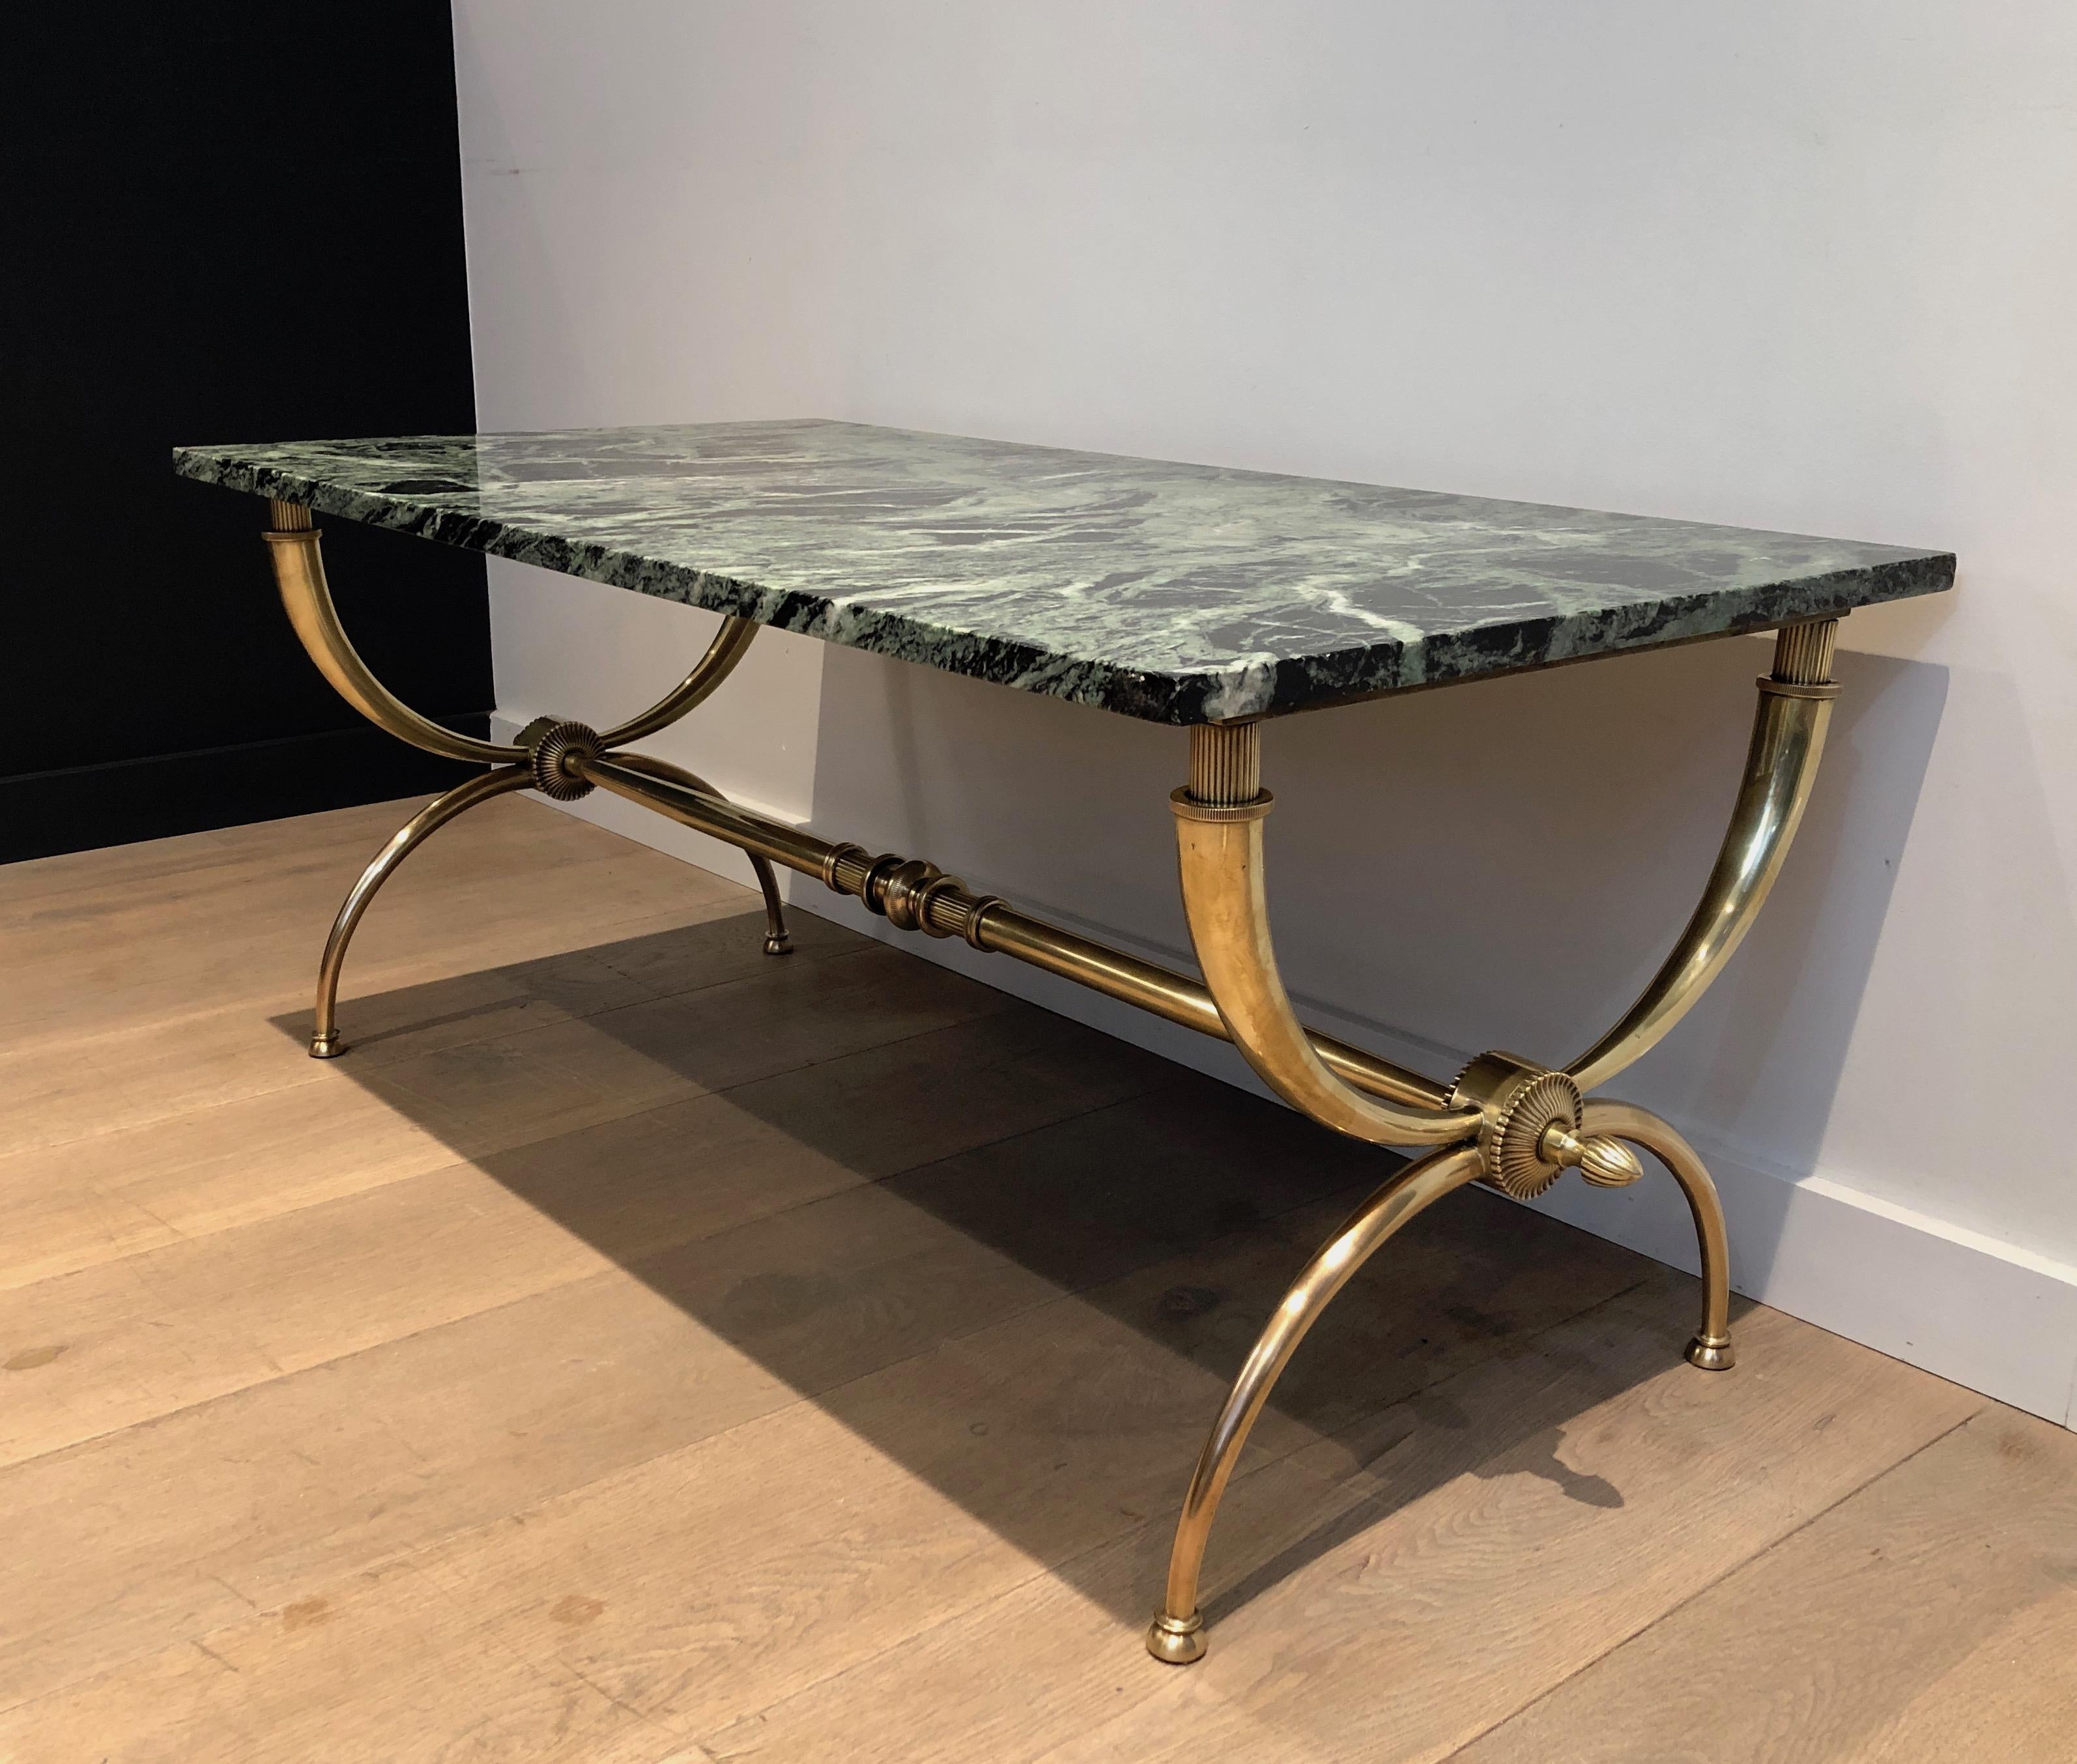 Neoclassical Raymond Subes Brass Coffee Table with Green Marble Top, French by Raymond Subes